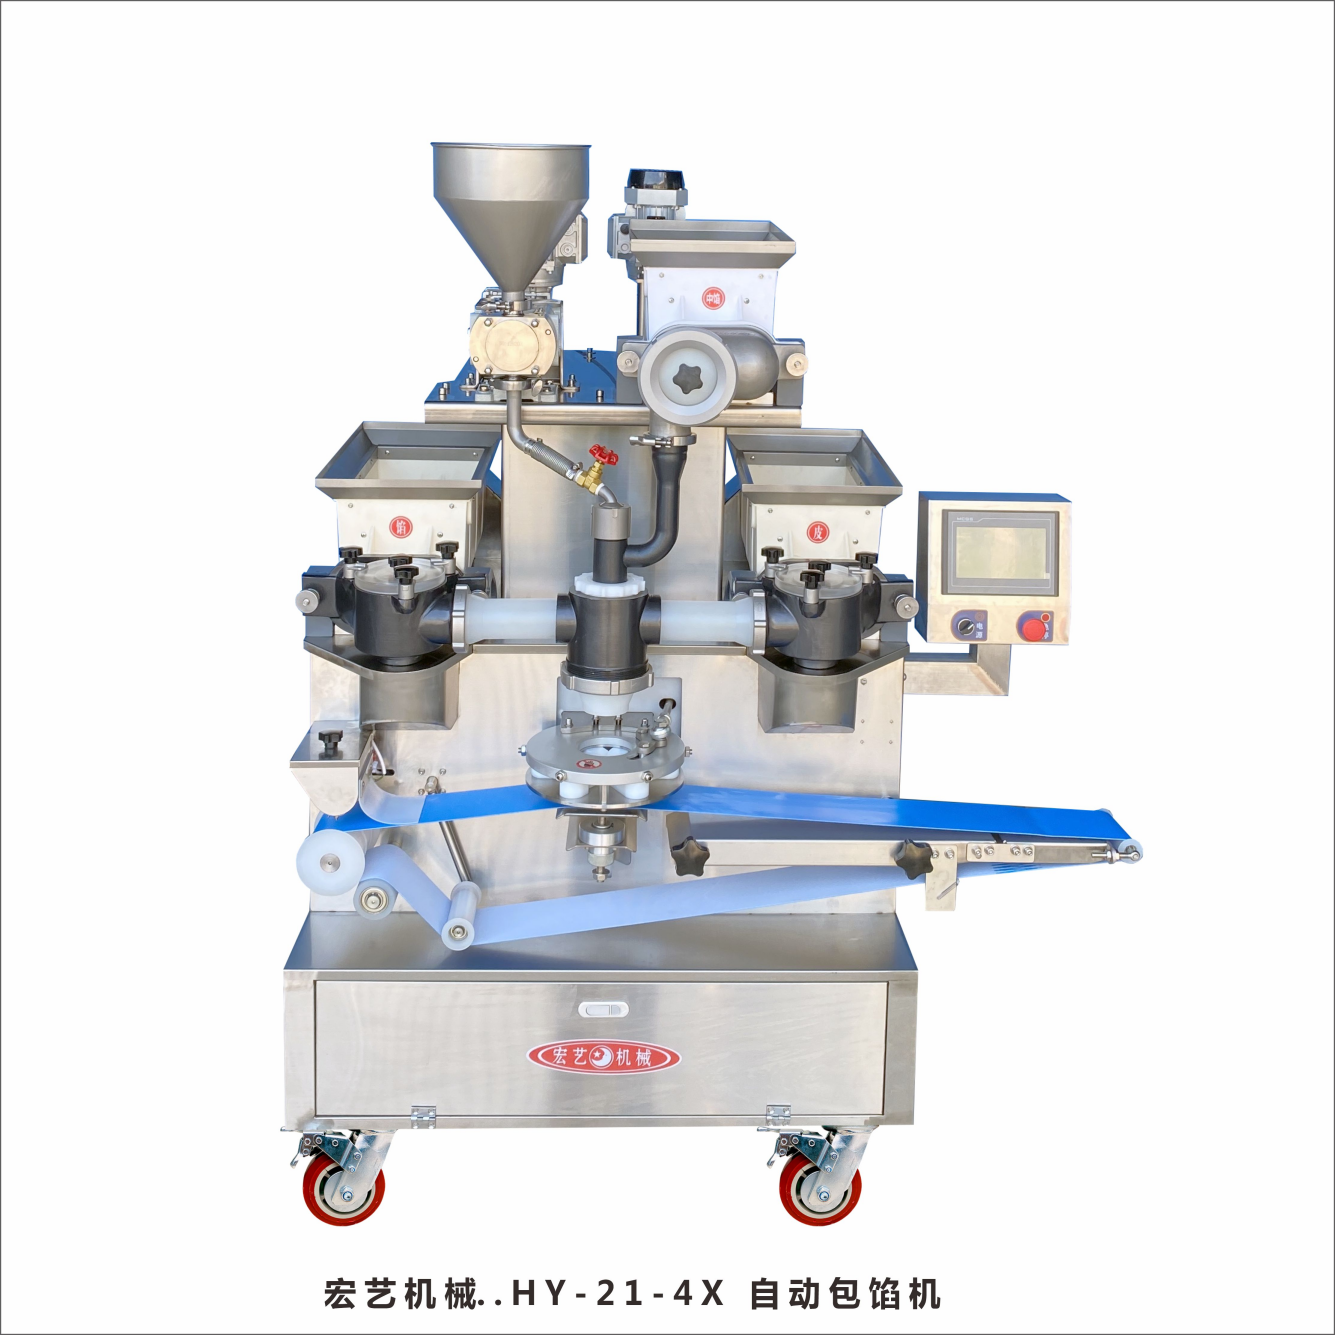 Automatic filling machine for small pie filling